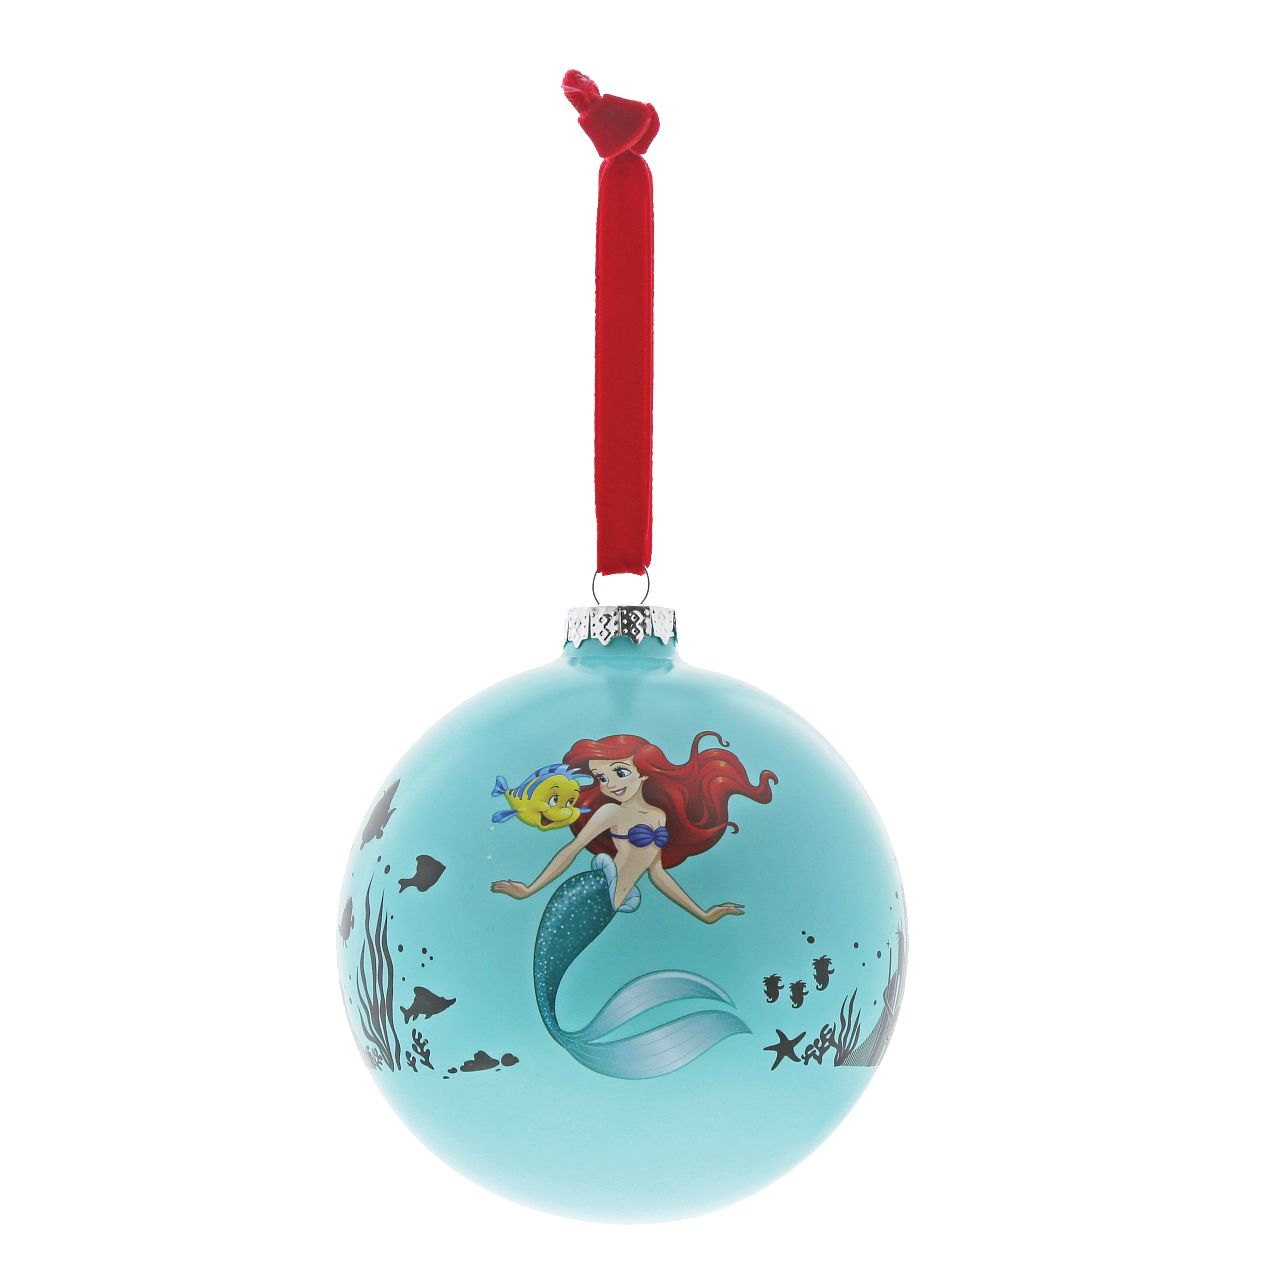 Disney Christmas Bauble The Little Mermaid Life is Bubbles  Ariel swims under the sea with Flounder in this beautiful glass bauble. This Little Mermaid treasured keepsake would make a lovely unique gift for a friend, or a self-purchase to brighten up the home. Presented in a branded window box.